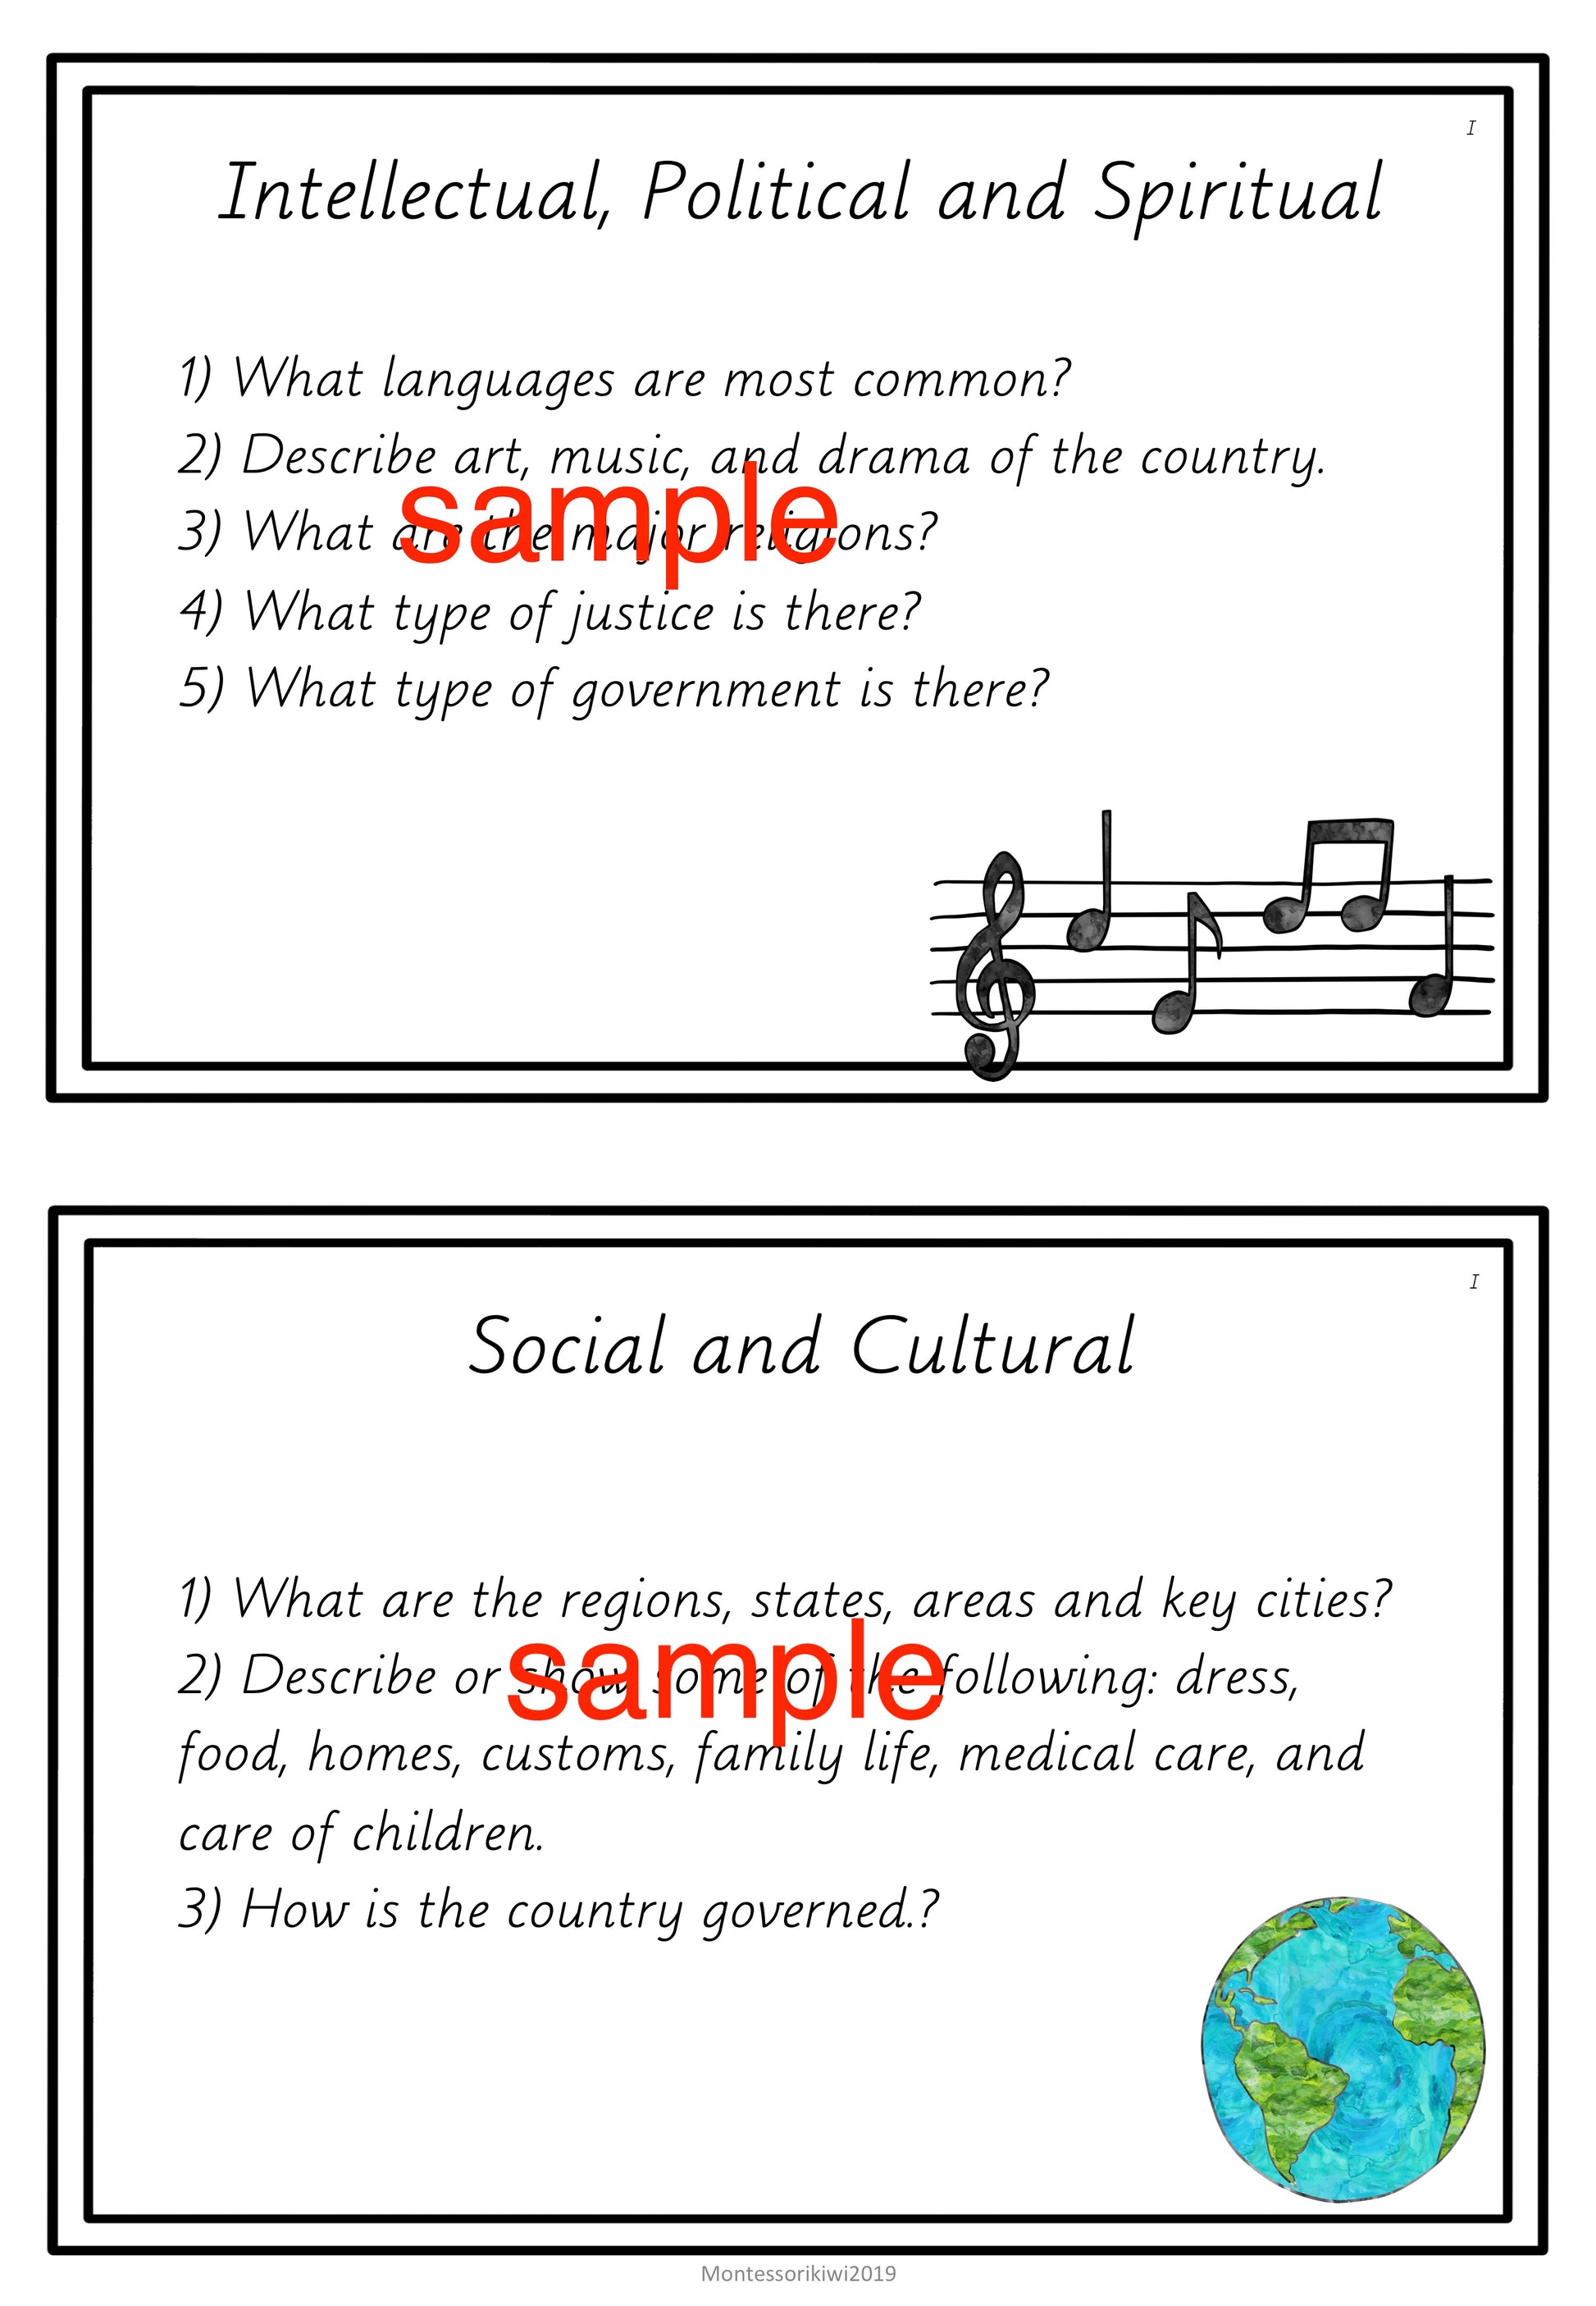 Cultural Geography Projects for 9-12 year olds - montessorikiwi